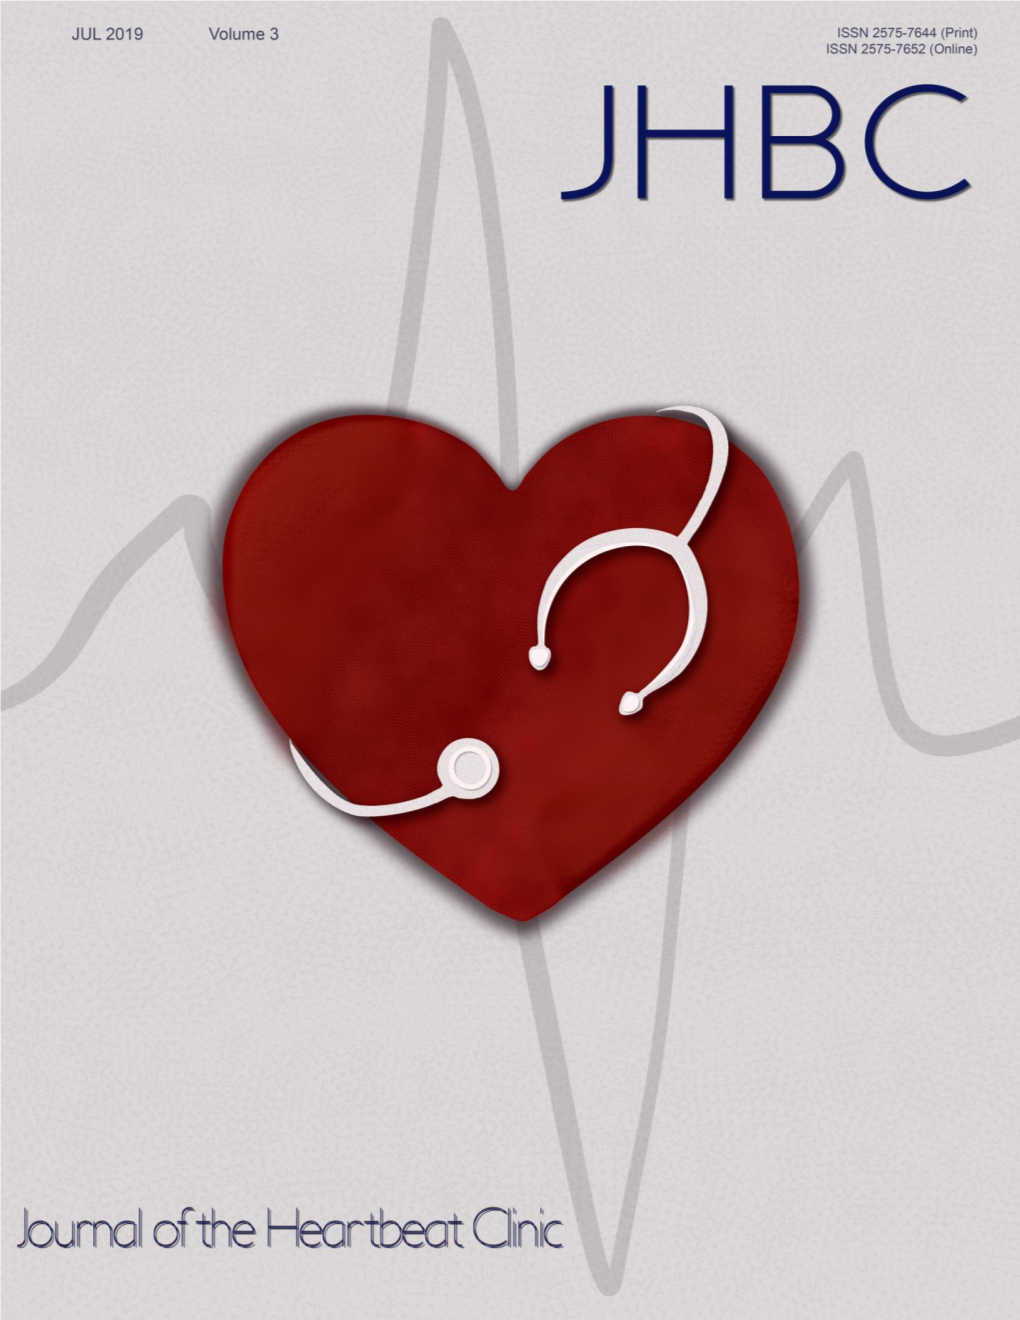 Journal of the Heartbeat Clinic Volume 3